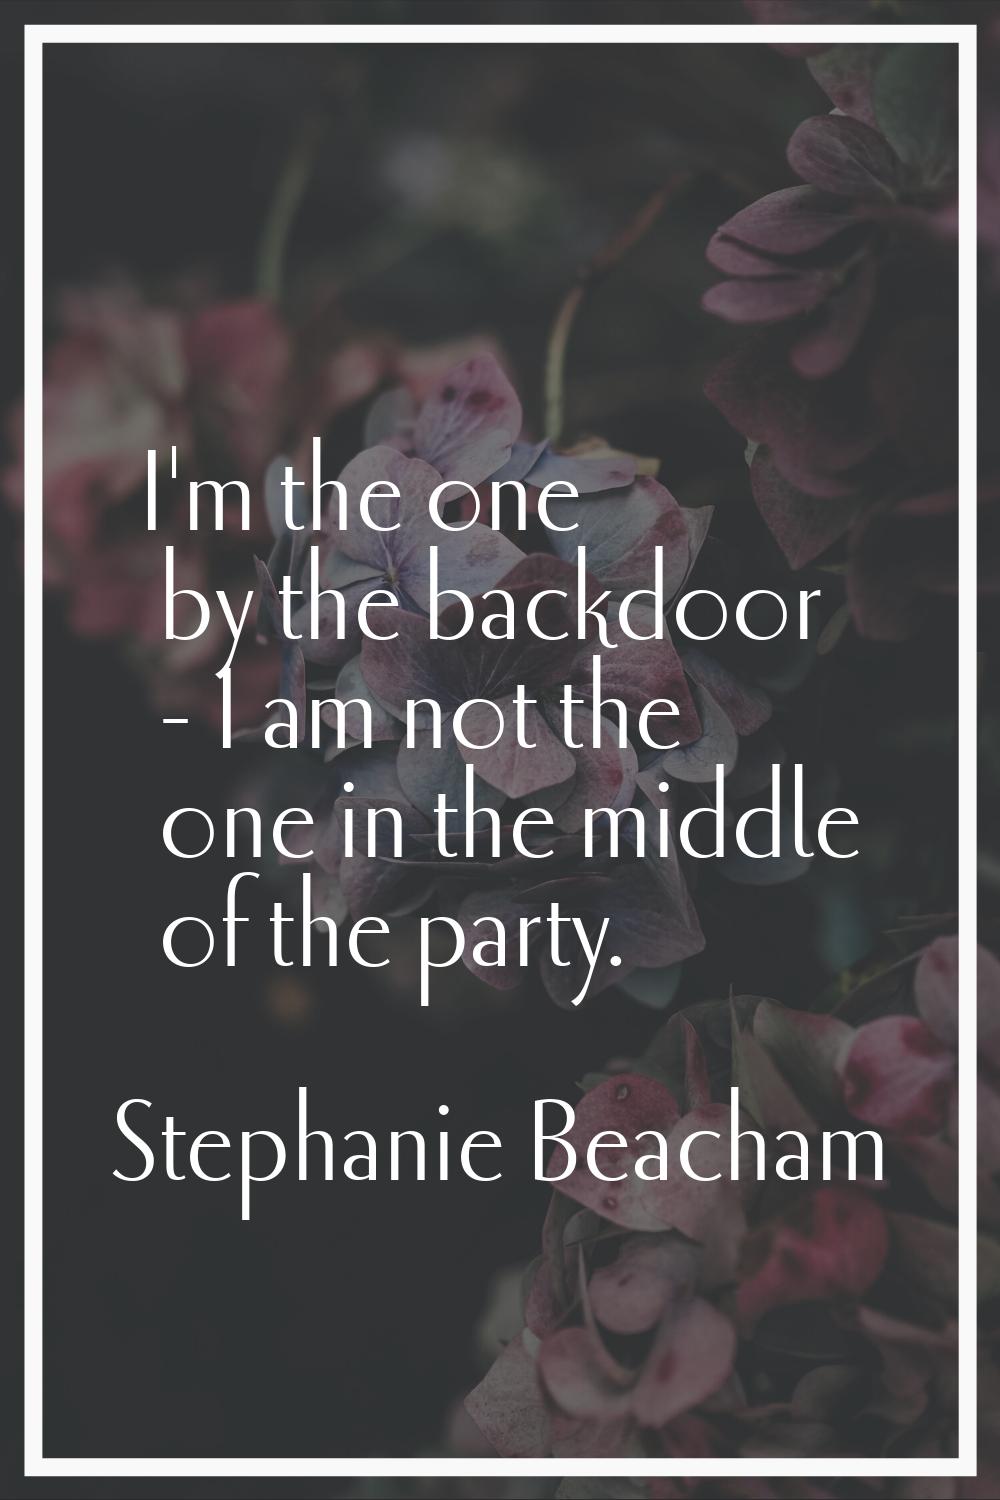 I'm the one by the backdoor - I am not the one in the middle of the party.